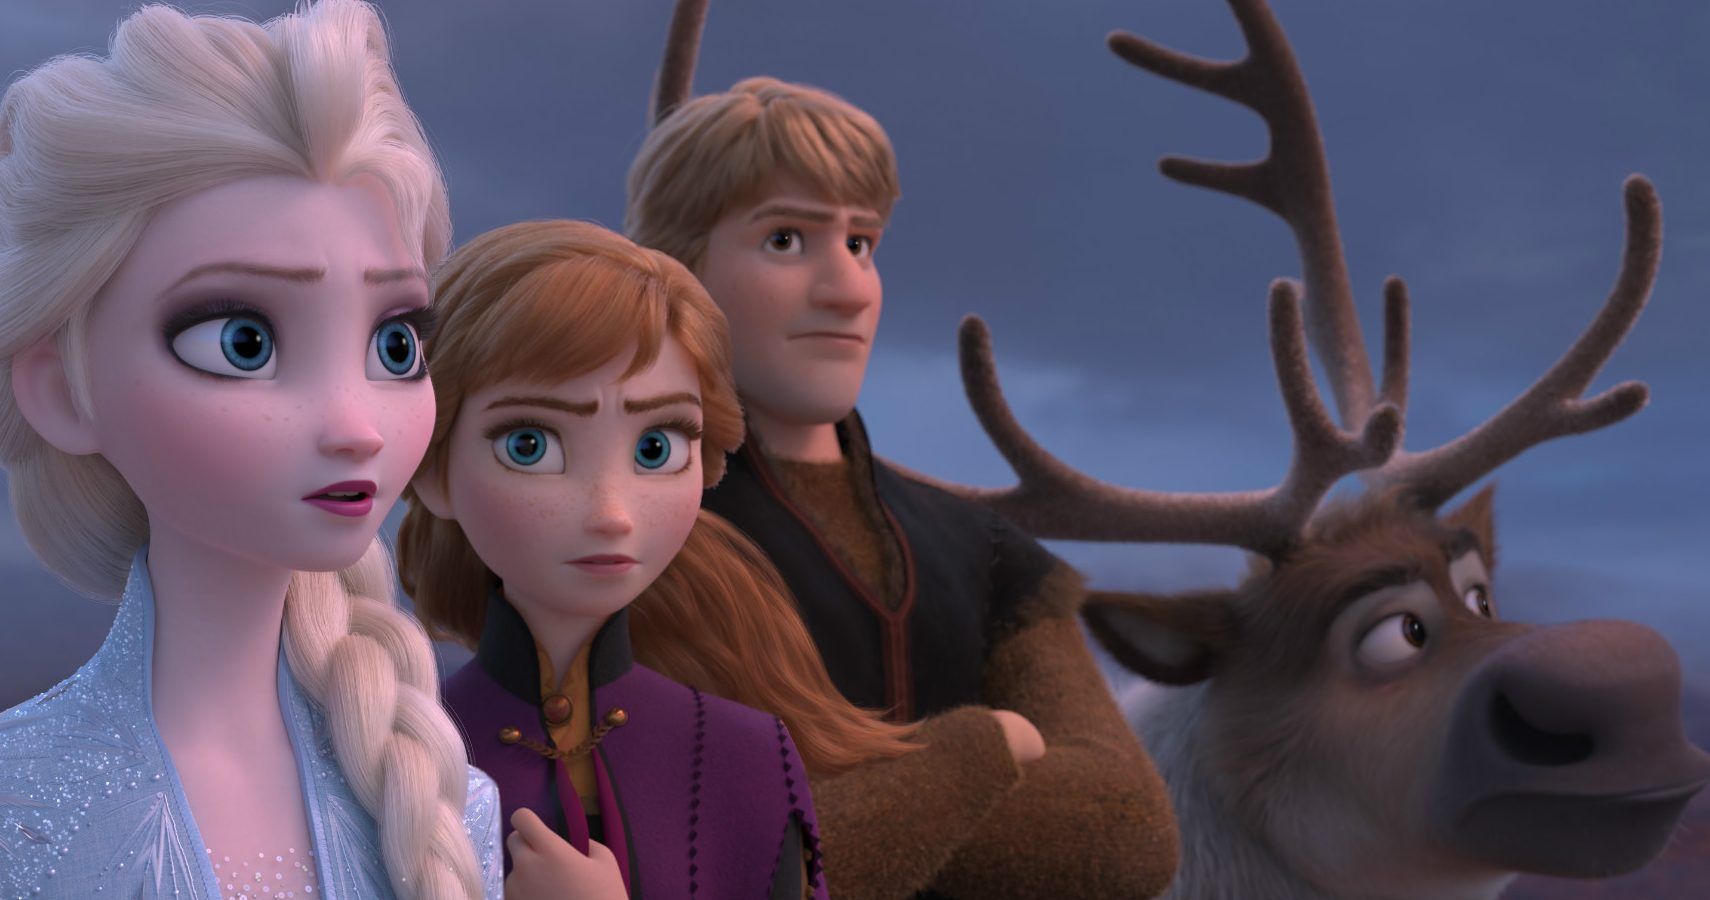 Frozen 2 Trailer Sets AllTime Views Record for Animated Movie